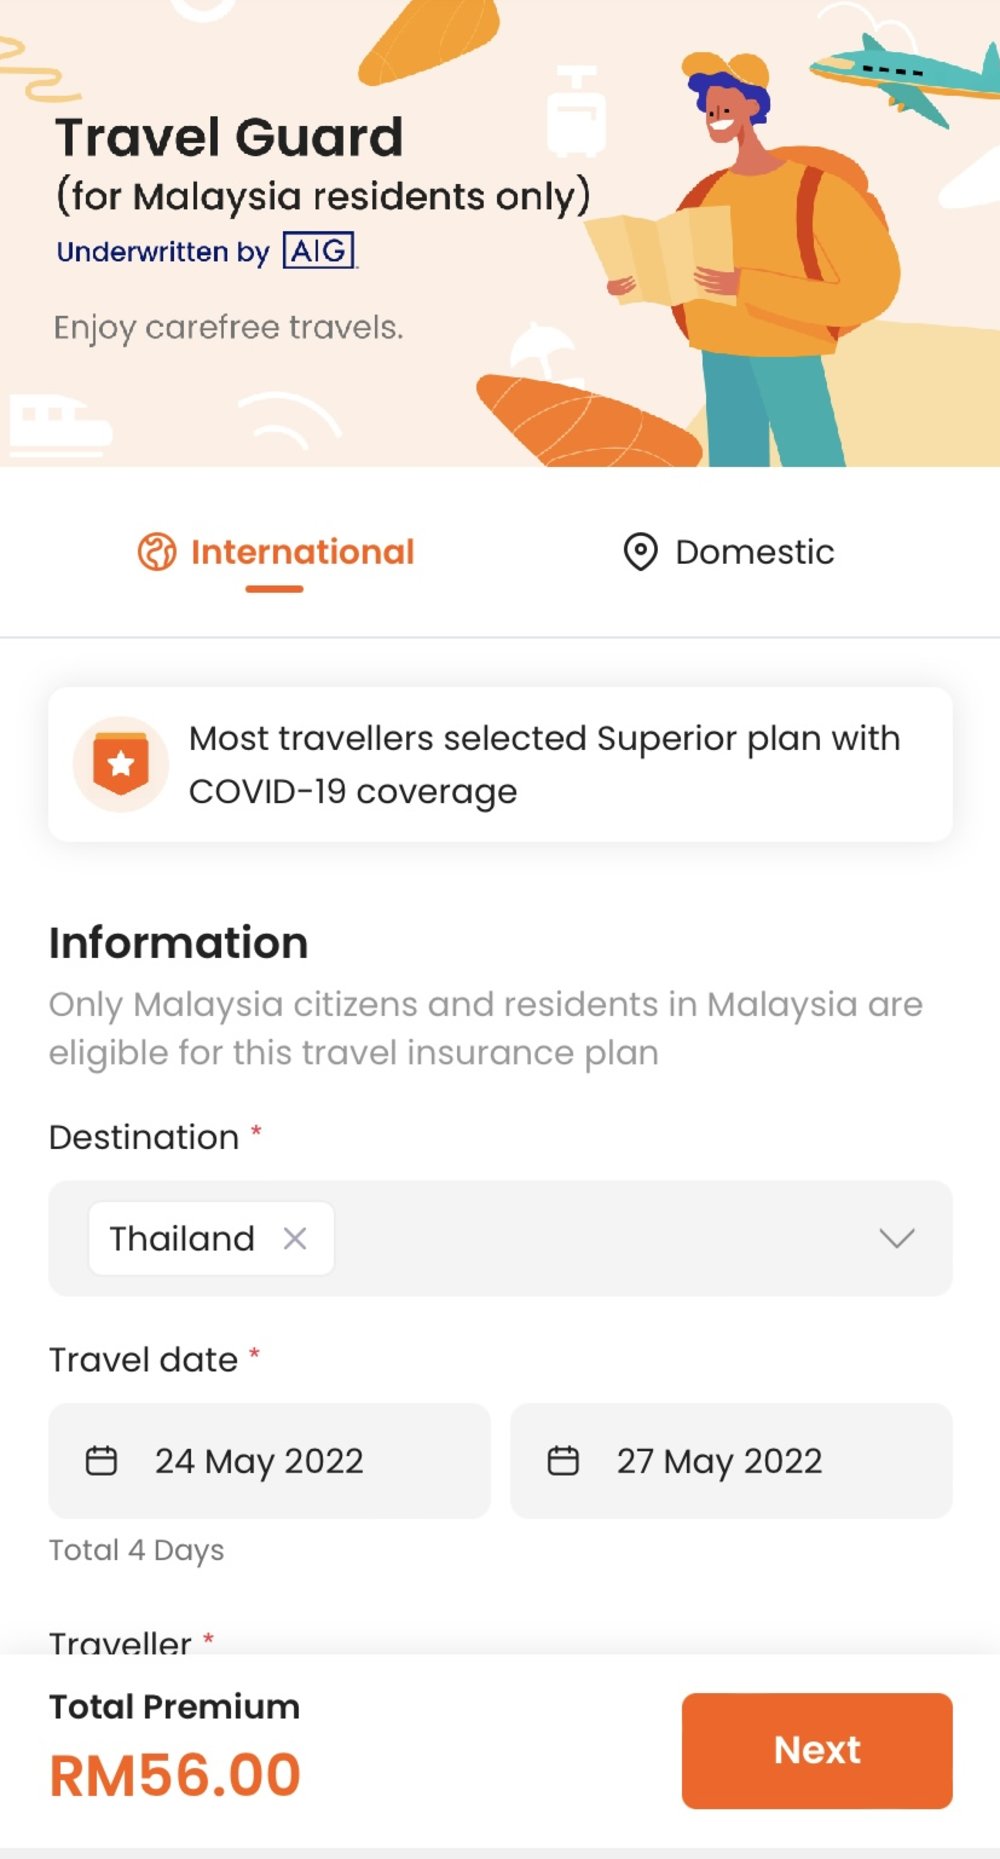 klook travel insurance review